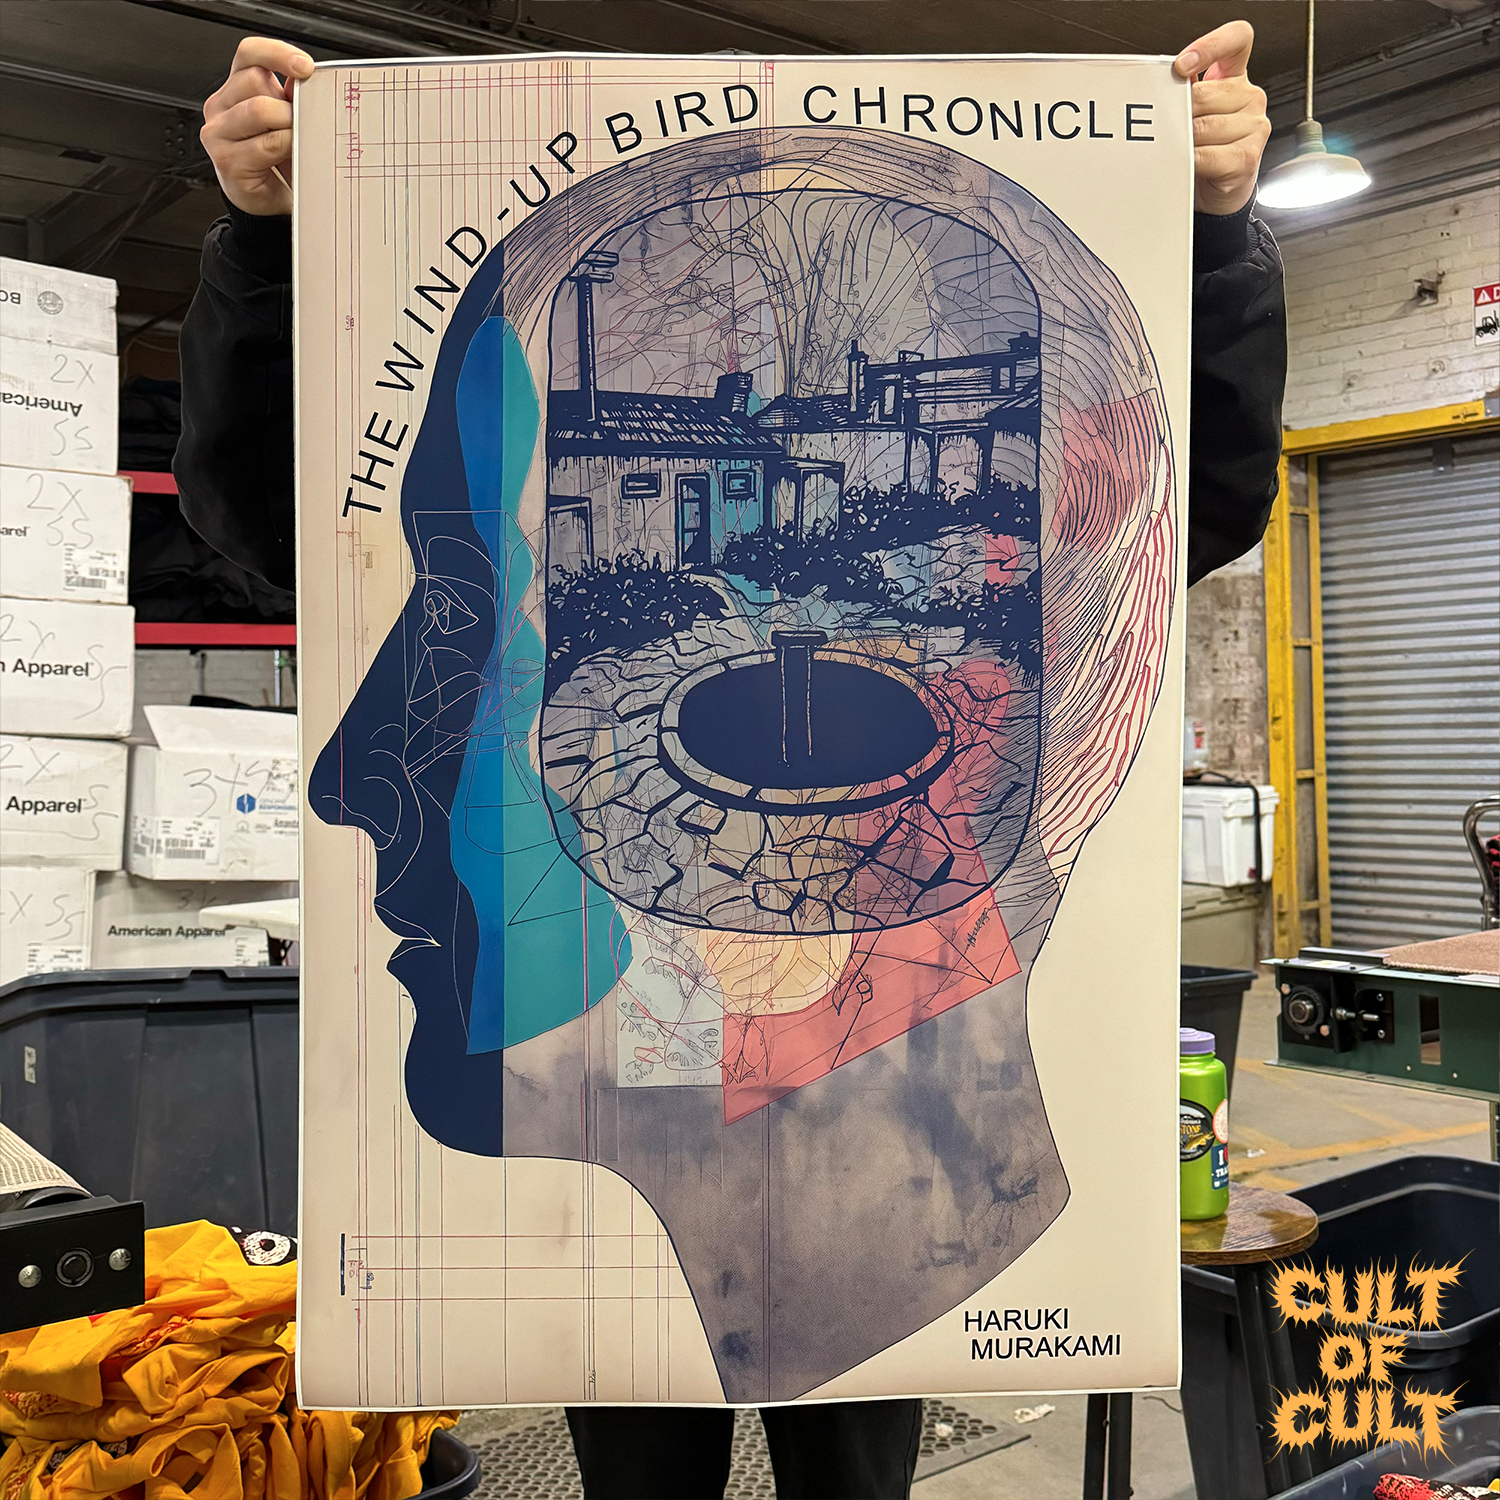 The Wind-Up Bird Chronicle digital poster being held up, the size is 24x36